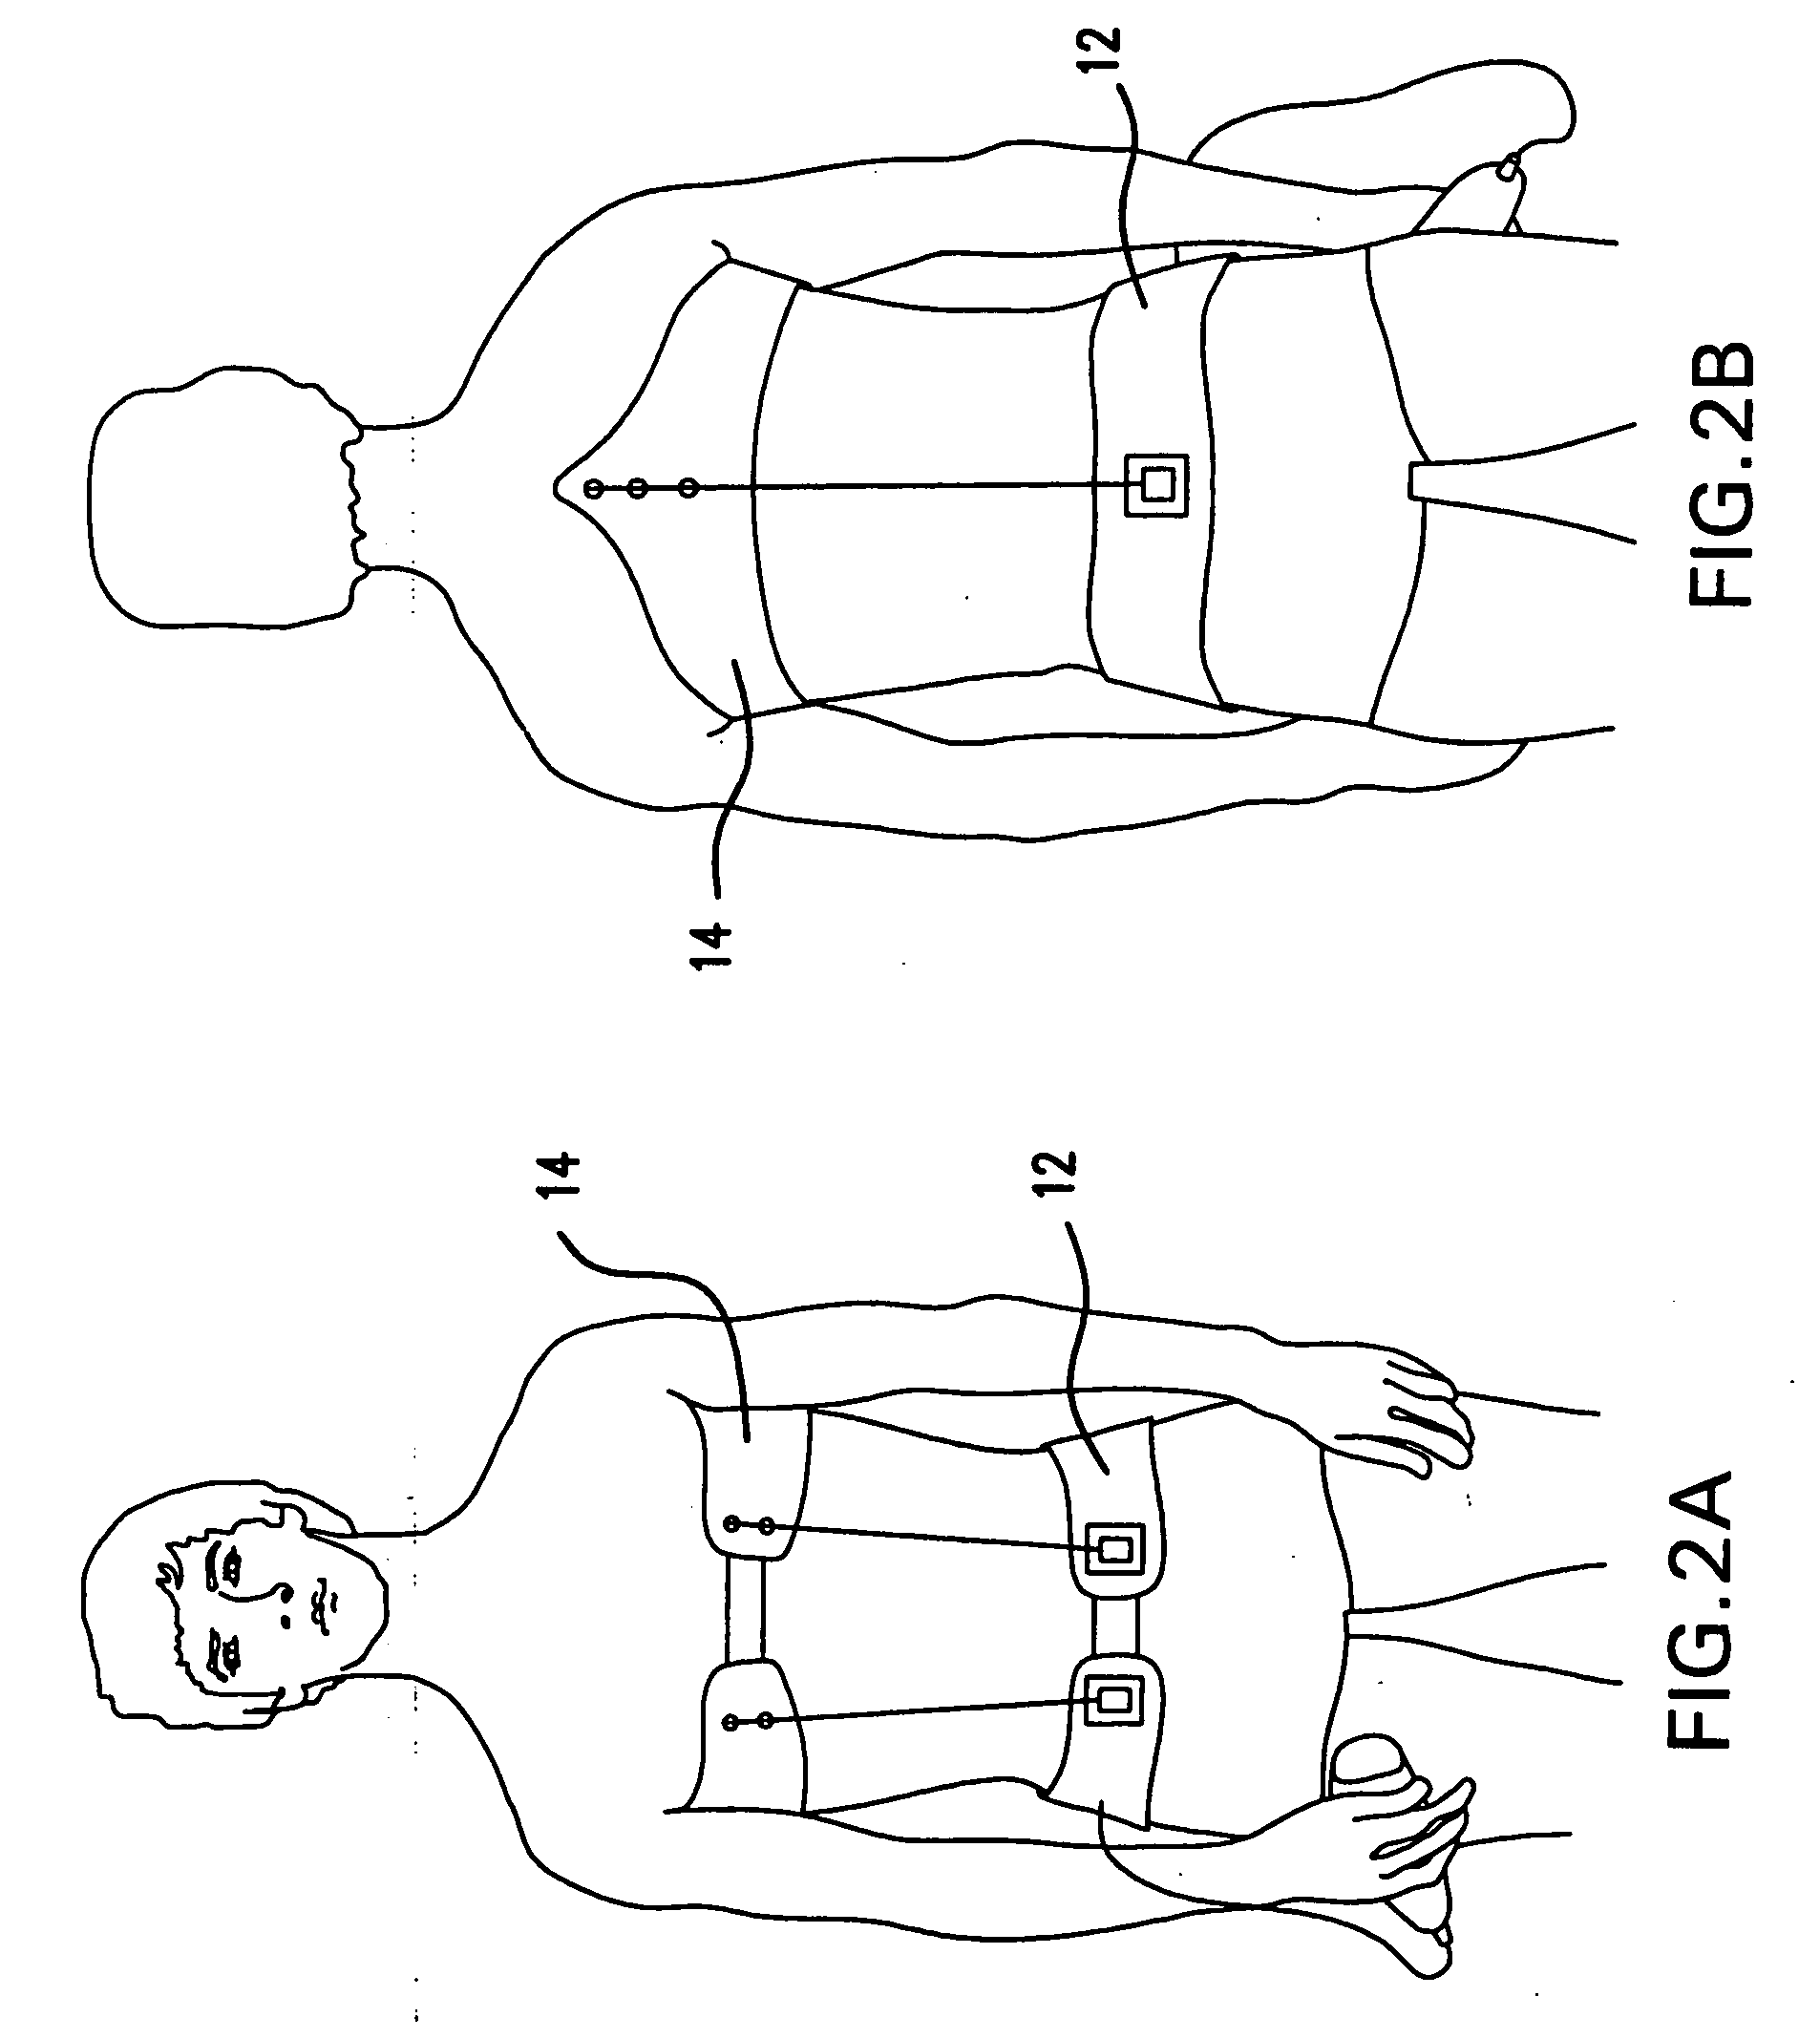 Intermittent passive traction device and method of use